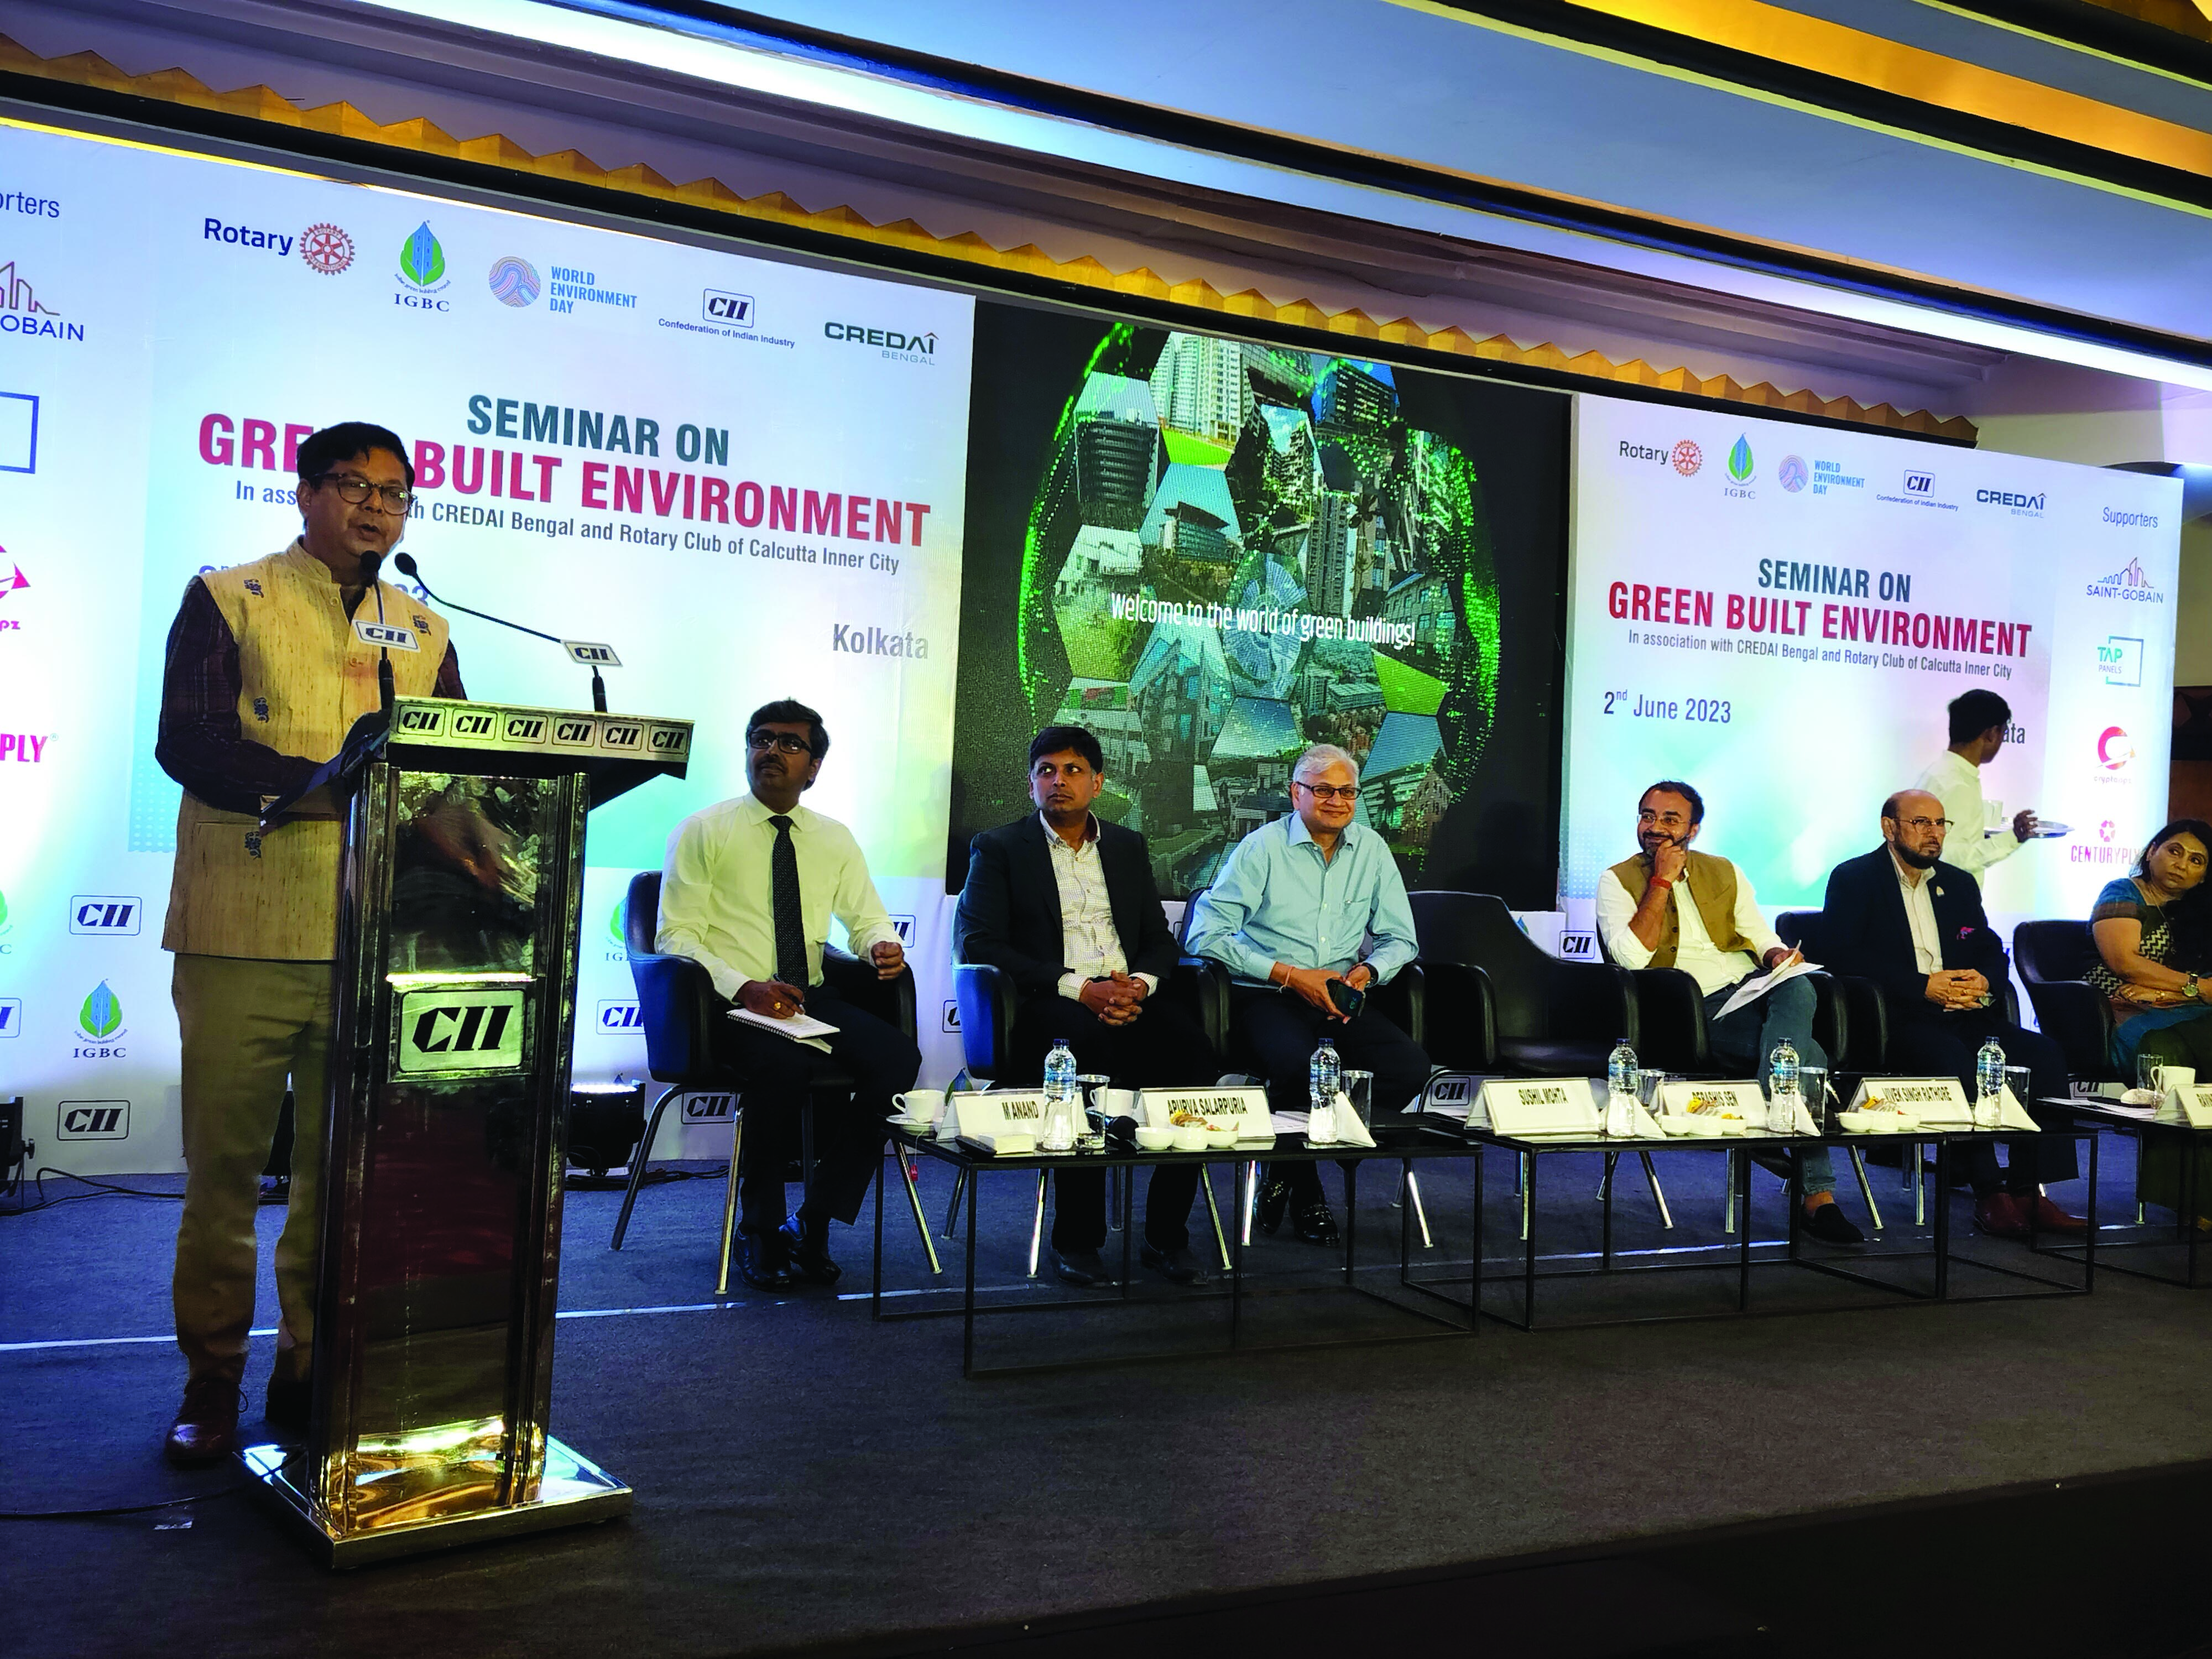 Seminar held to spread awareness on green building movement